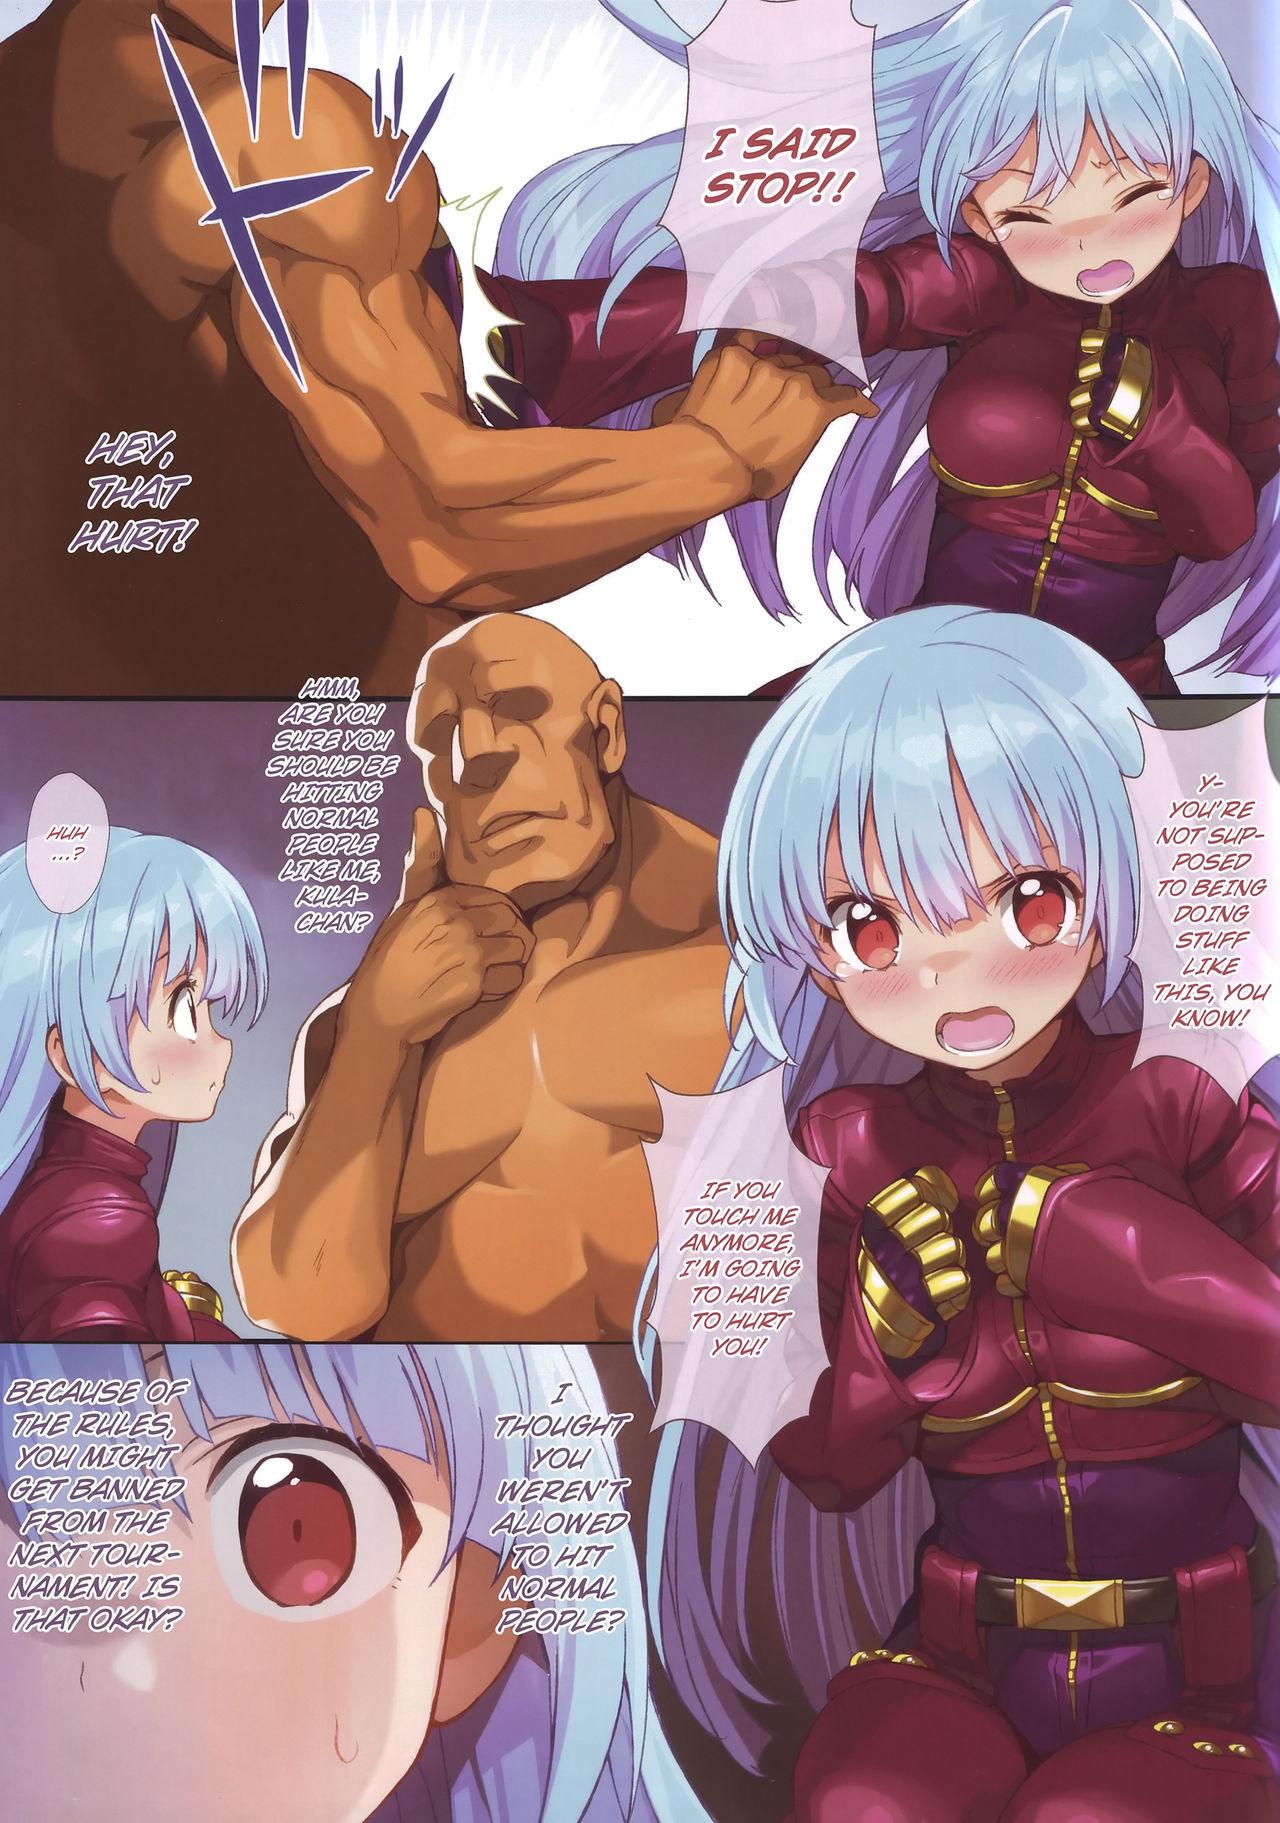 Edging FREE CANDY + FREE PAPER - King of fighters Gay Ass Fucking - Page 4